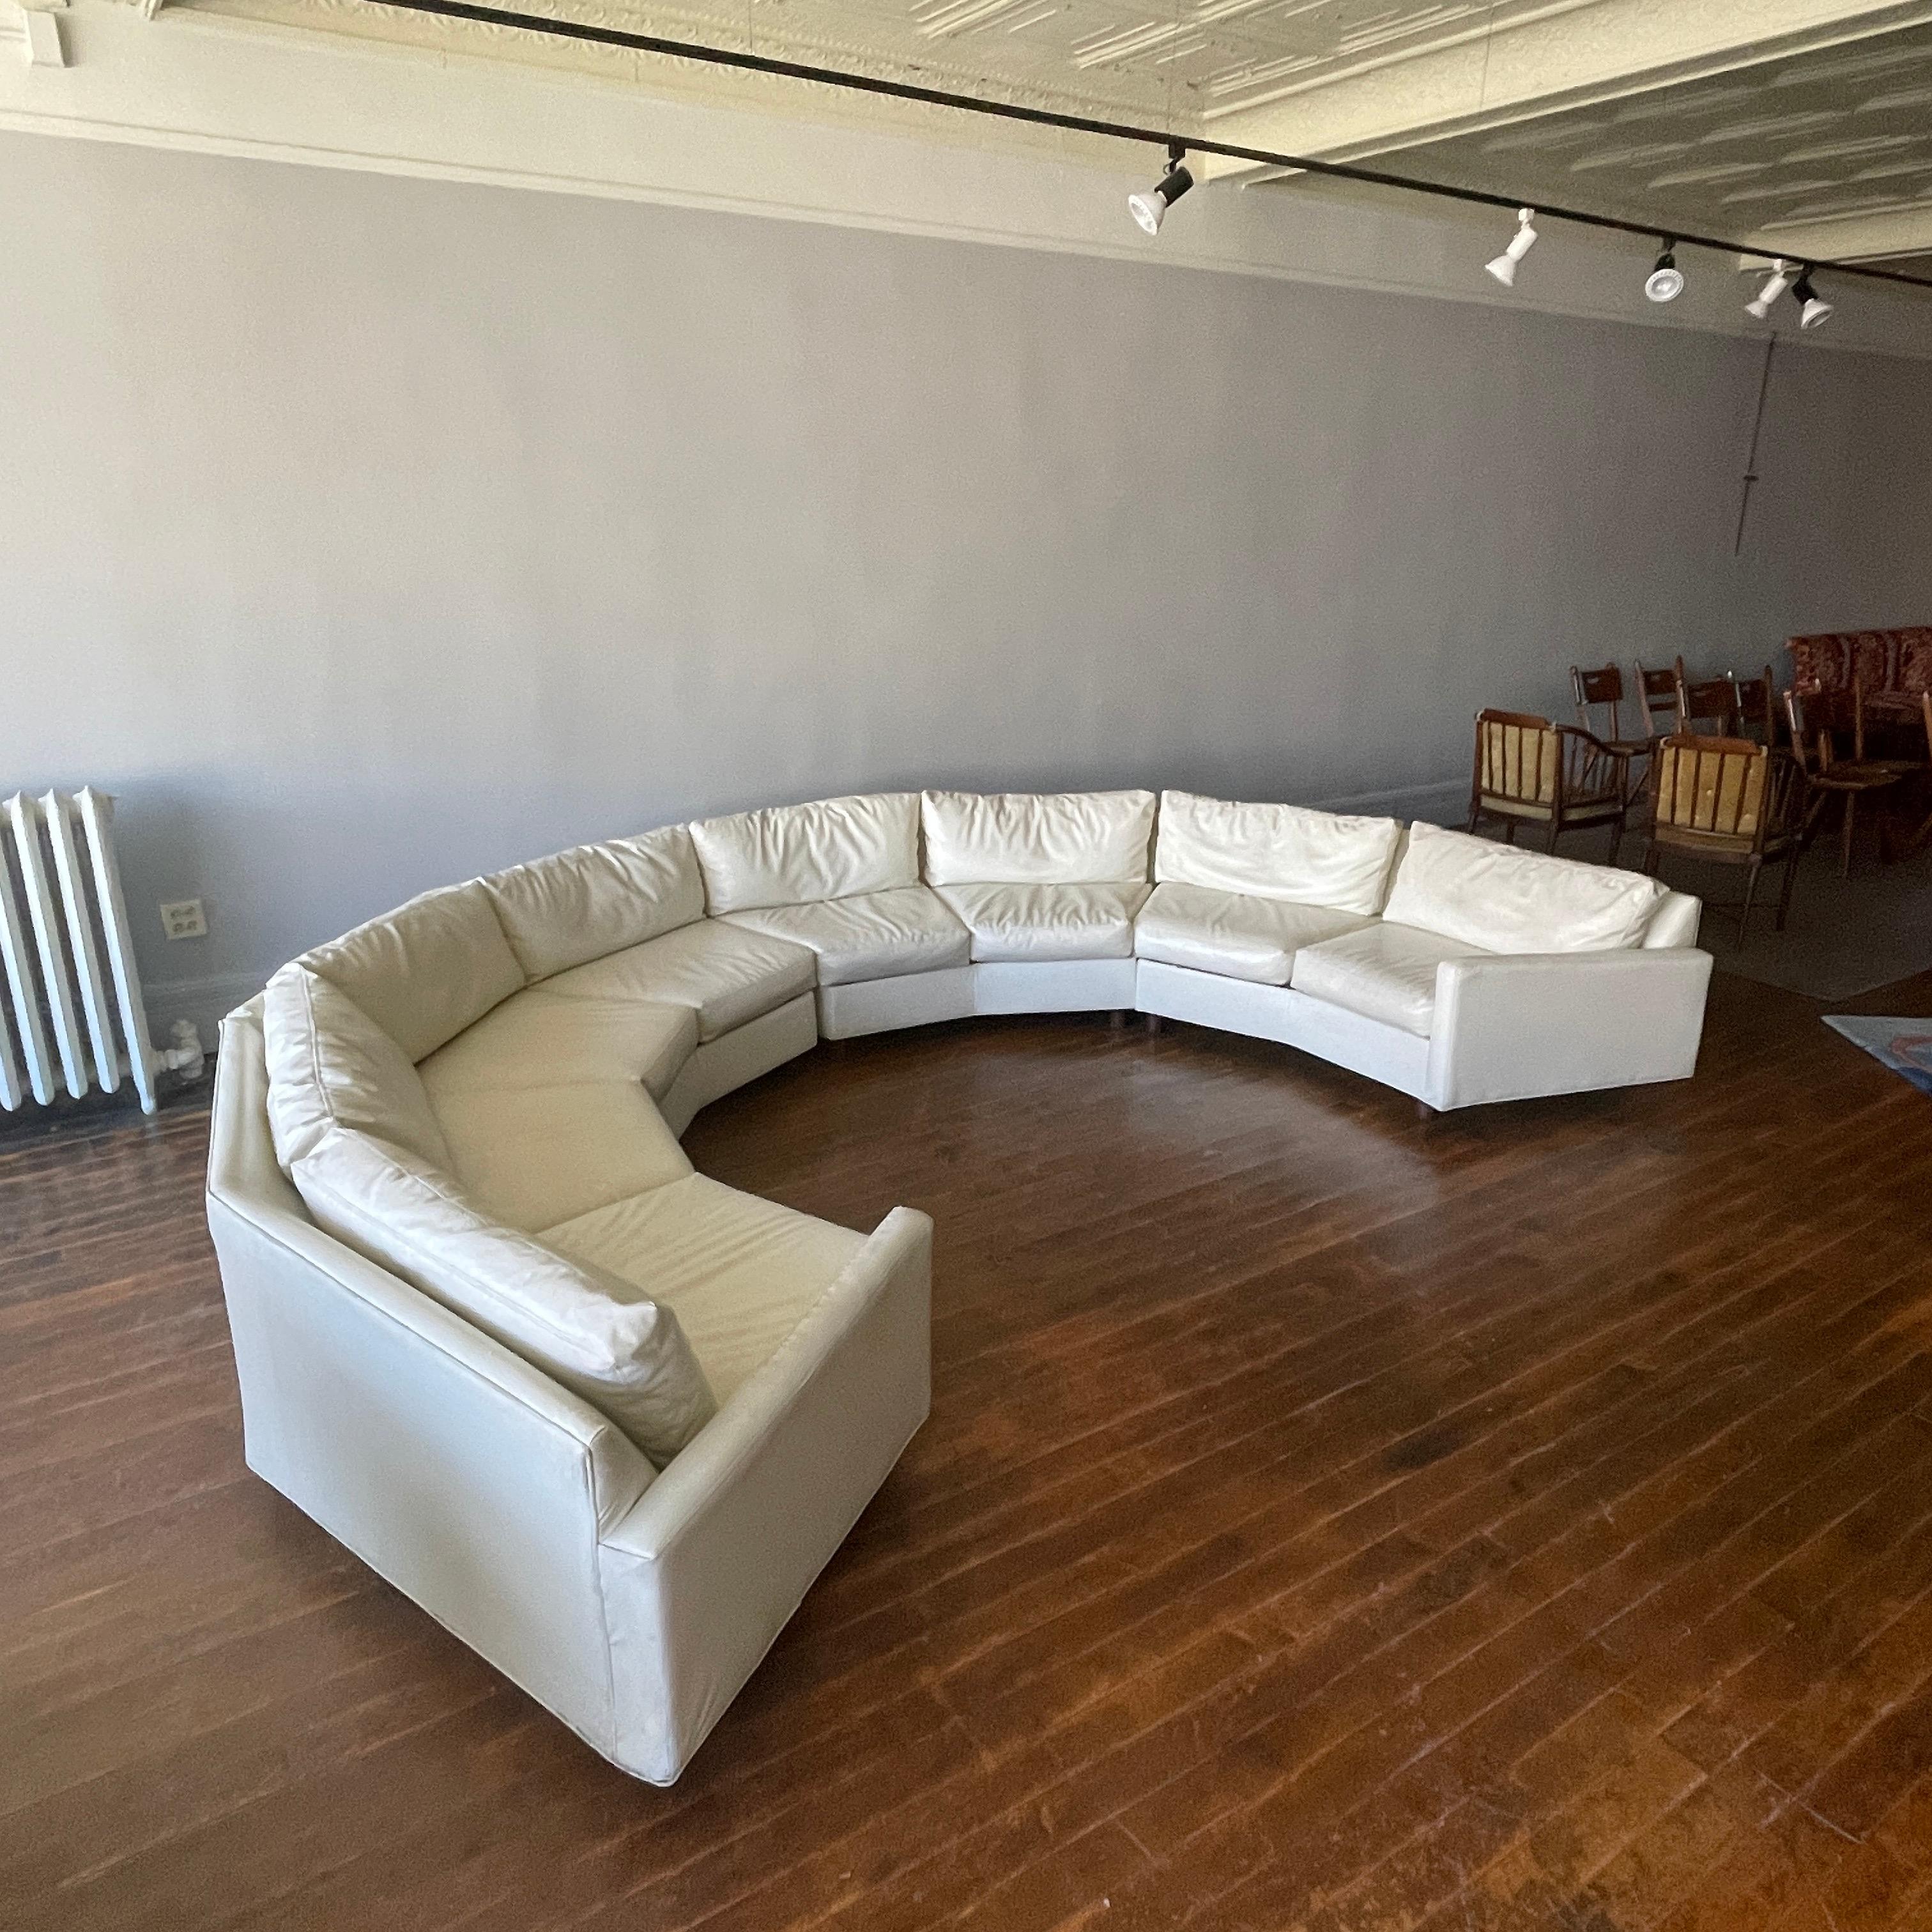 Stunning circular sectional by Selig Monroe. Consists of four independent pieces. Each piece measures 75